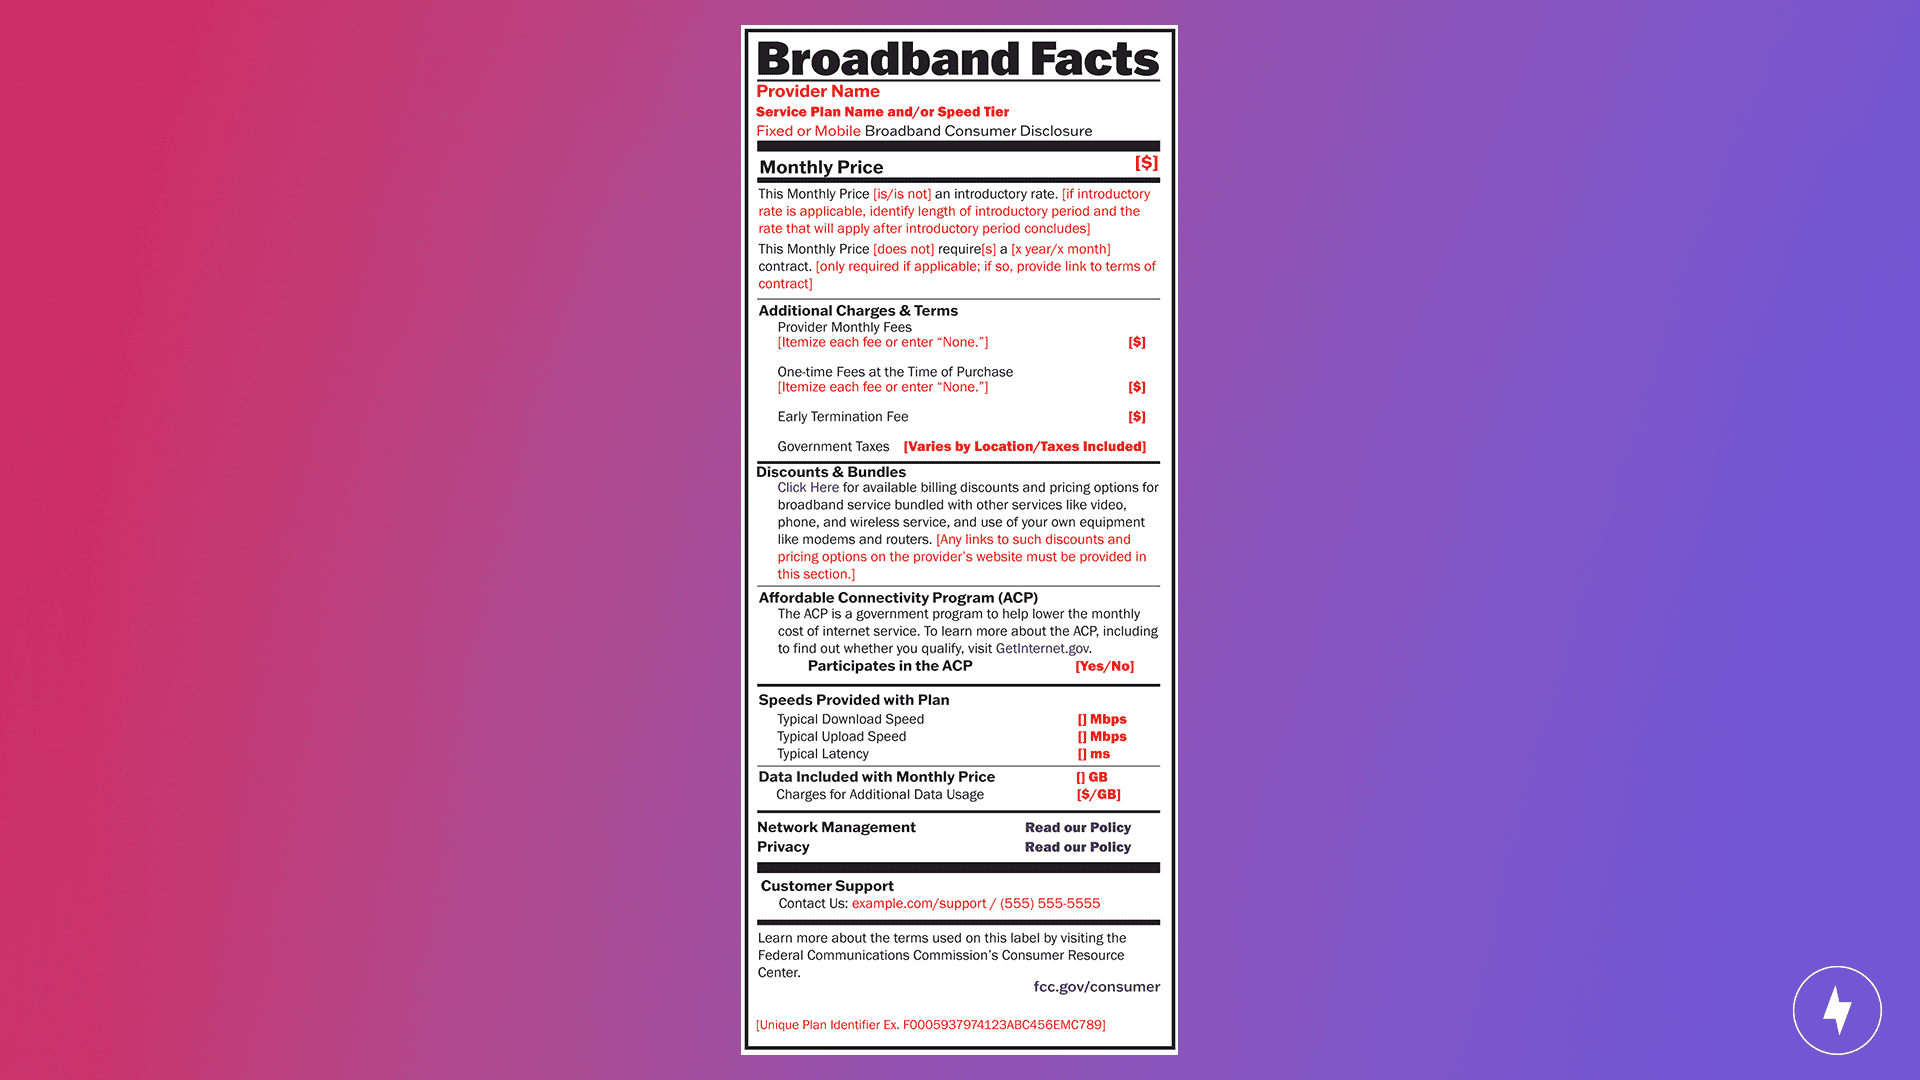 Example of the FCC’s broadband consumer labels